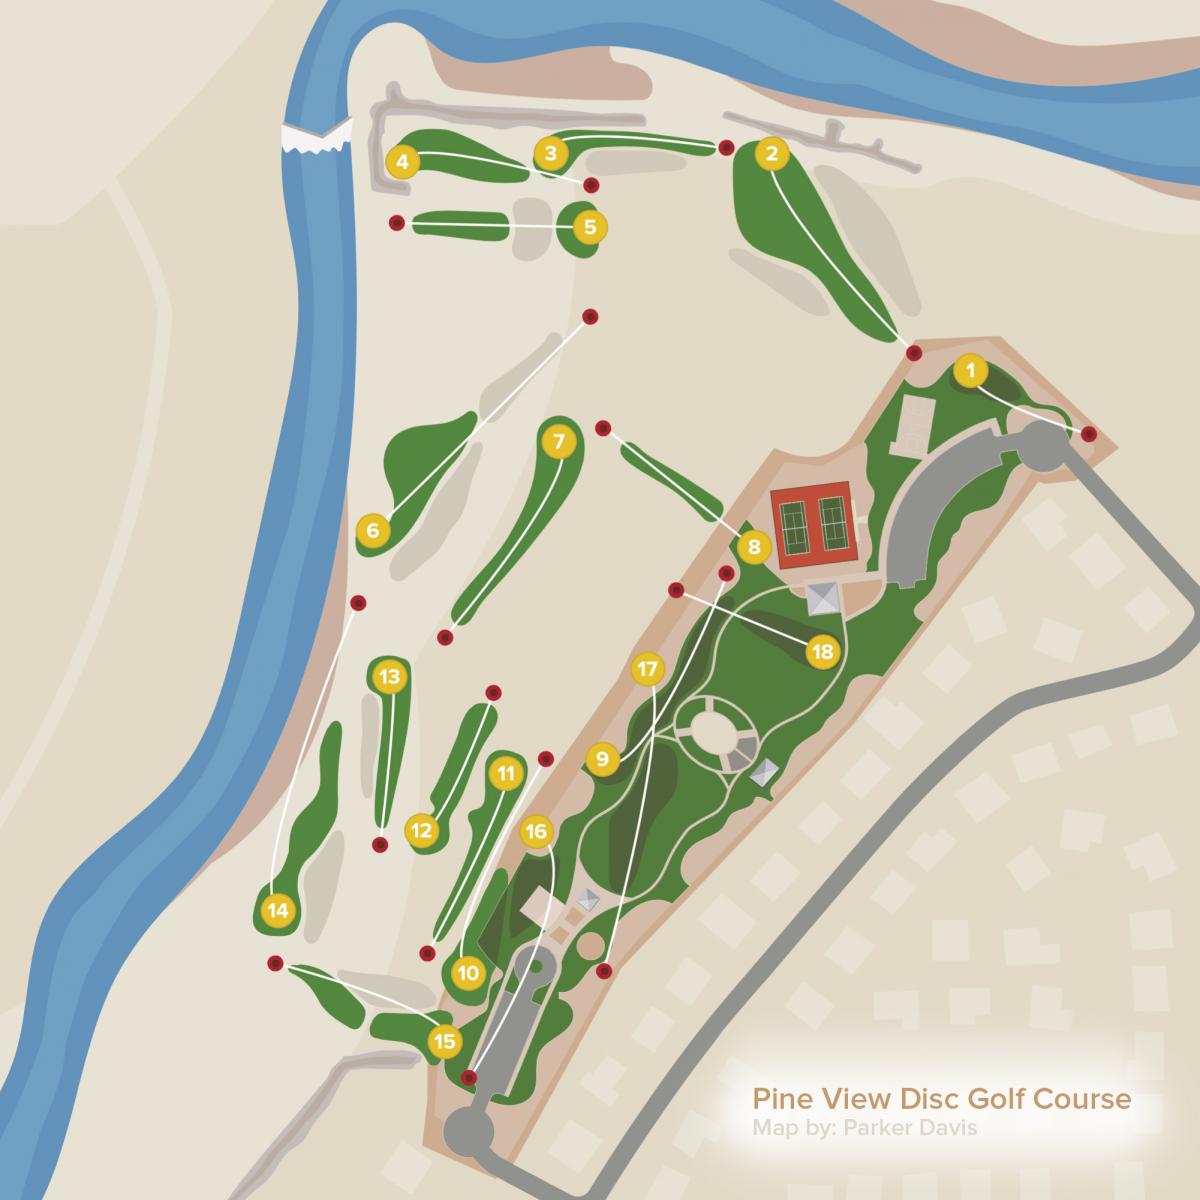 Pine View Disc Golf Course Map